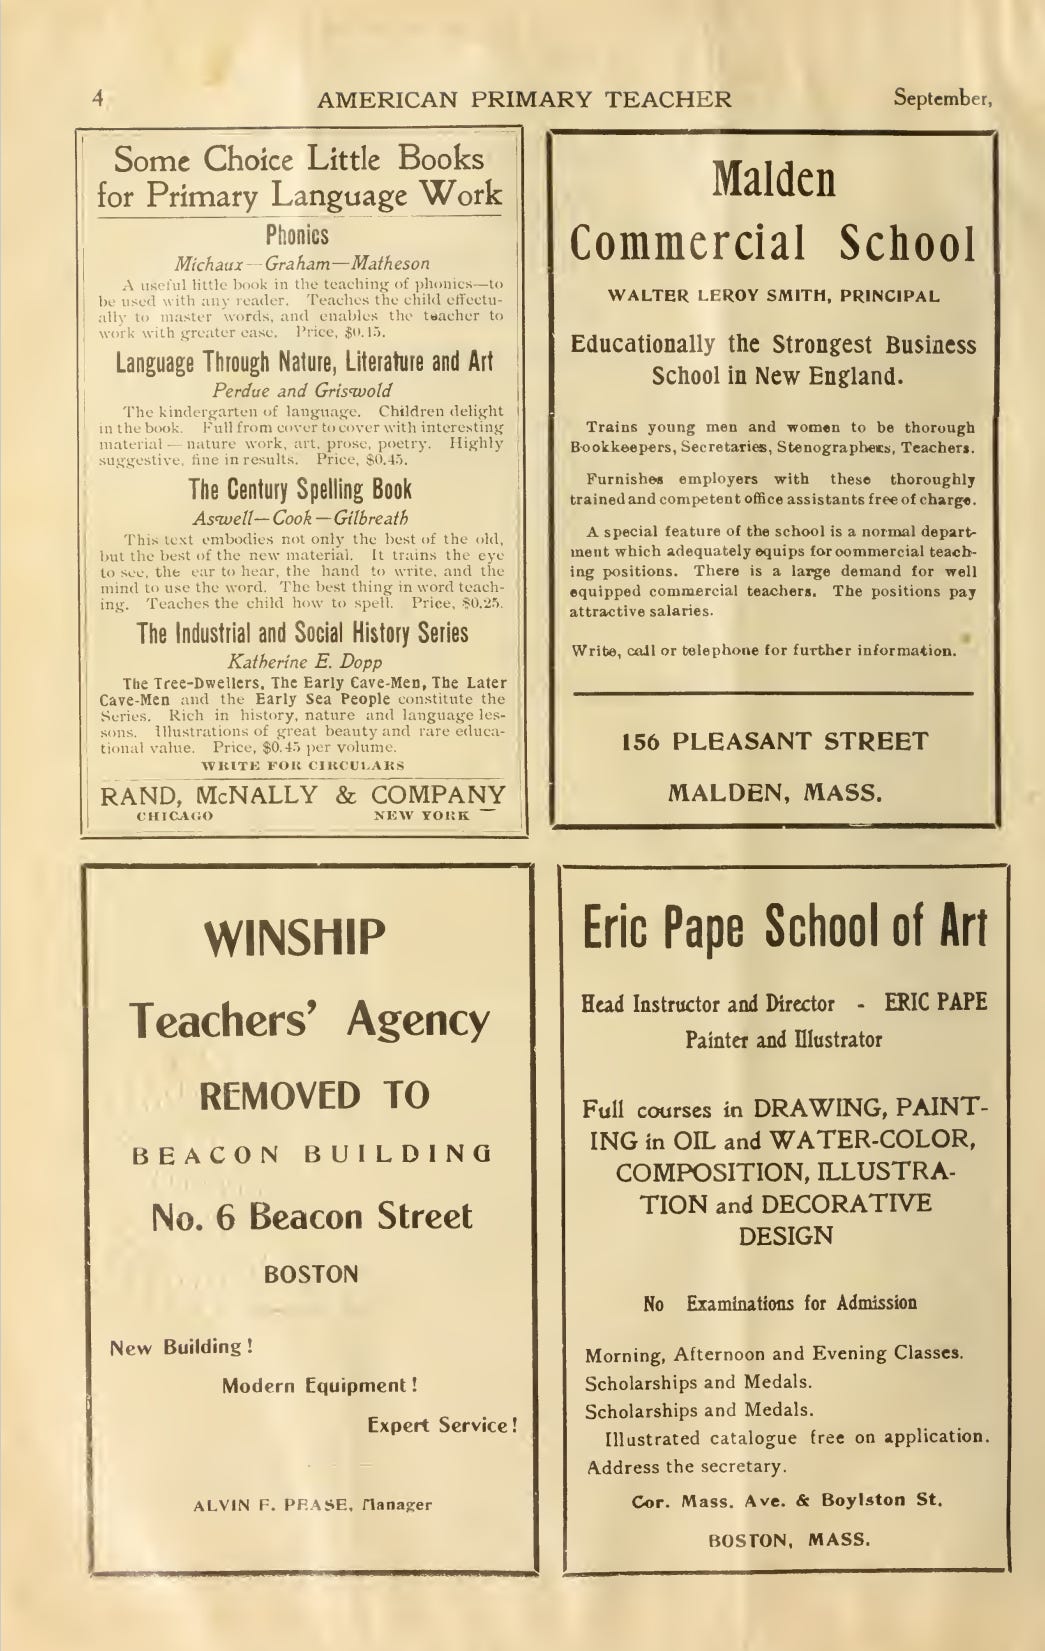 American Primary Teacher Page 4 of the September 1911 edition.